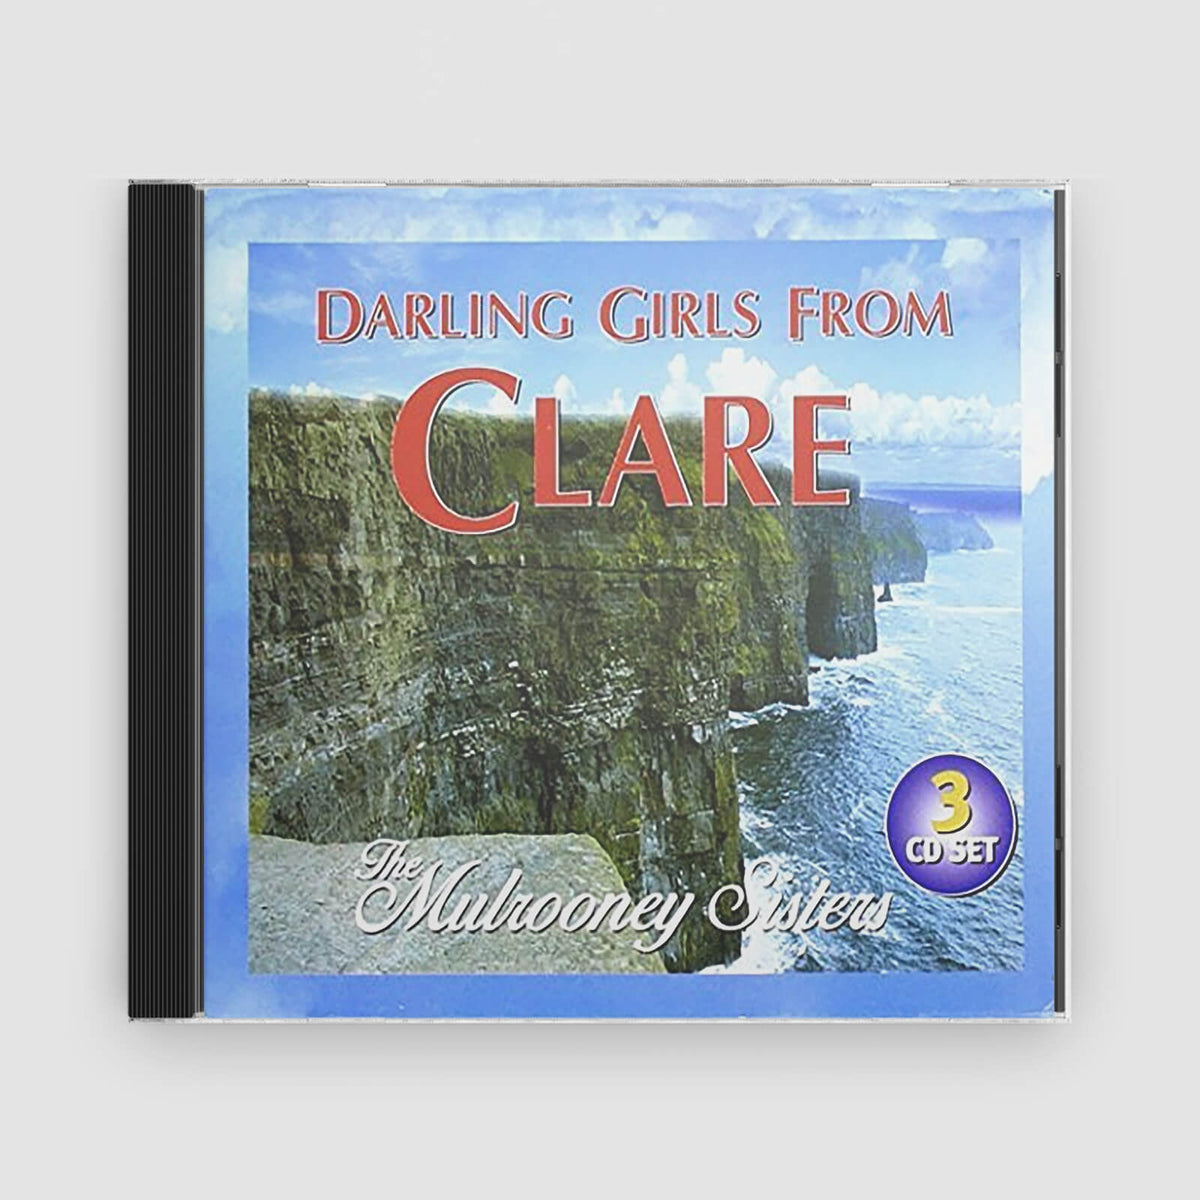 The Mulrooney Sisters : Darling Girls From Clare